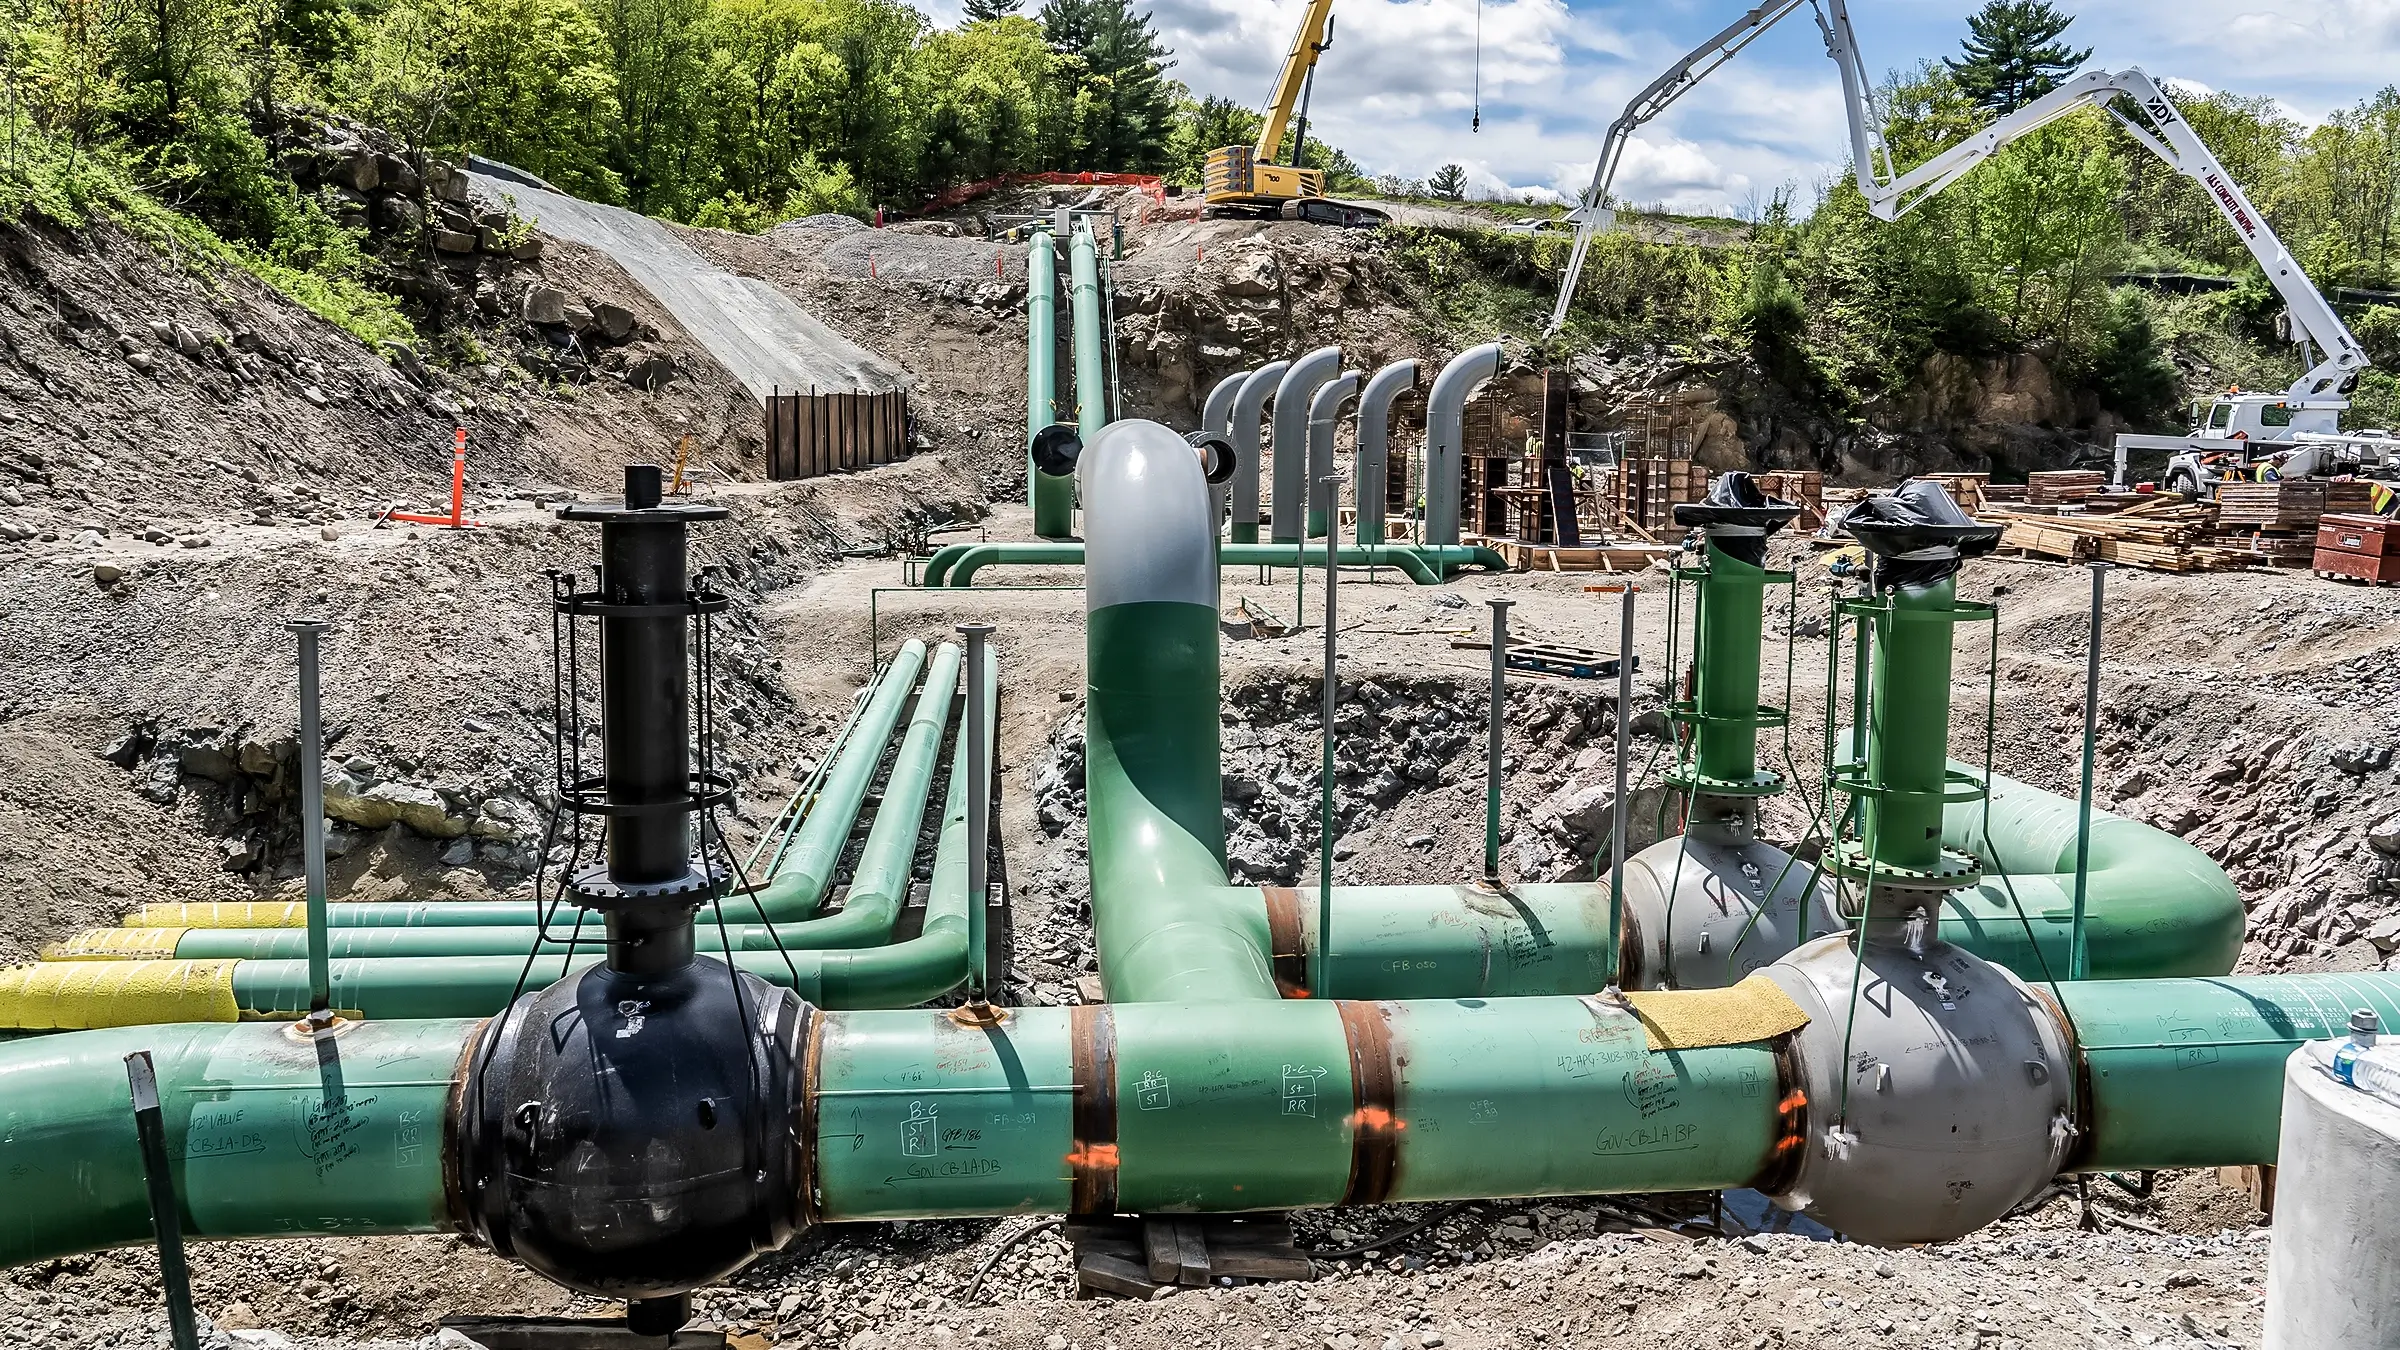 Compressor station facility pipelines in an abandoned quarry.